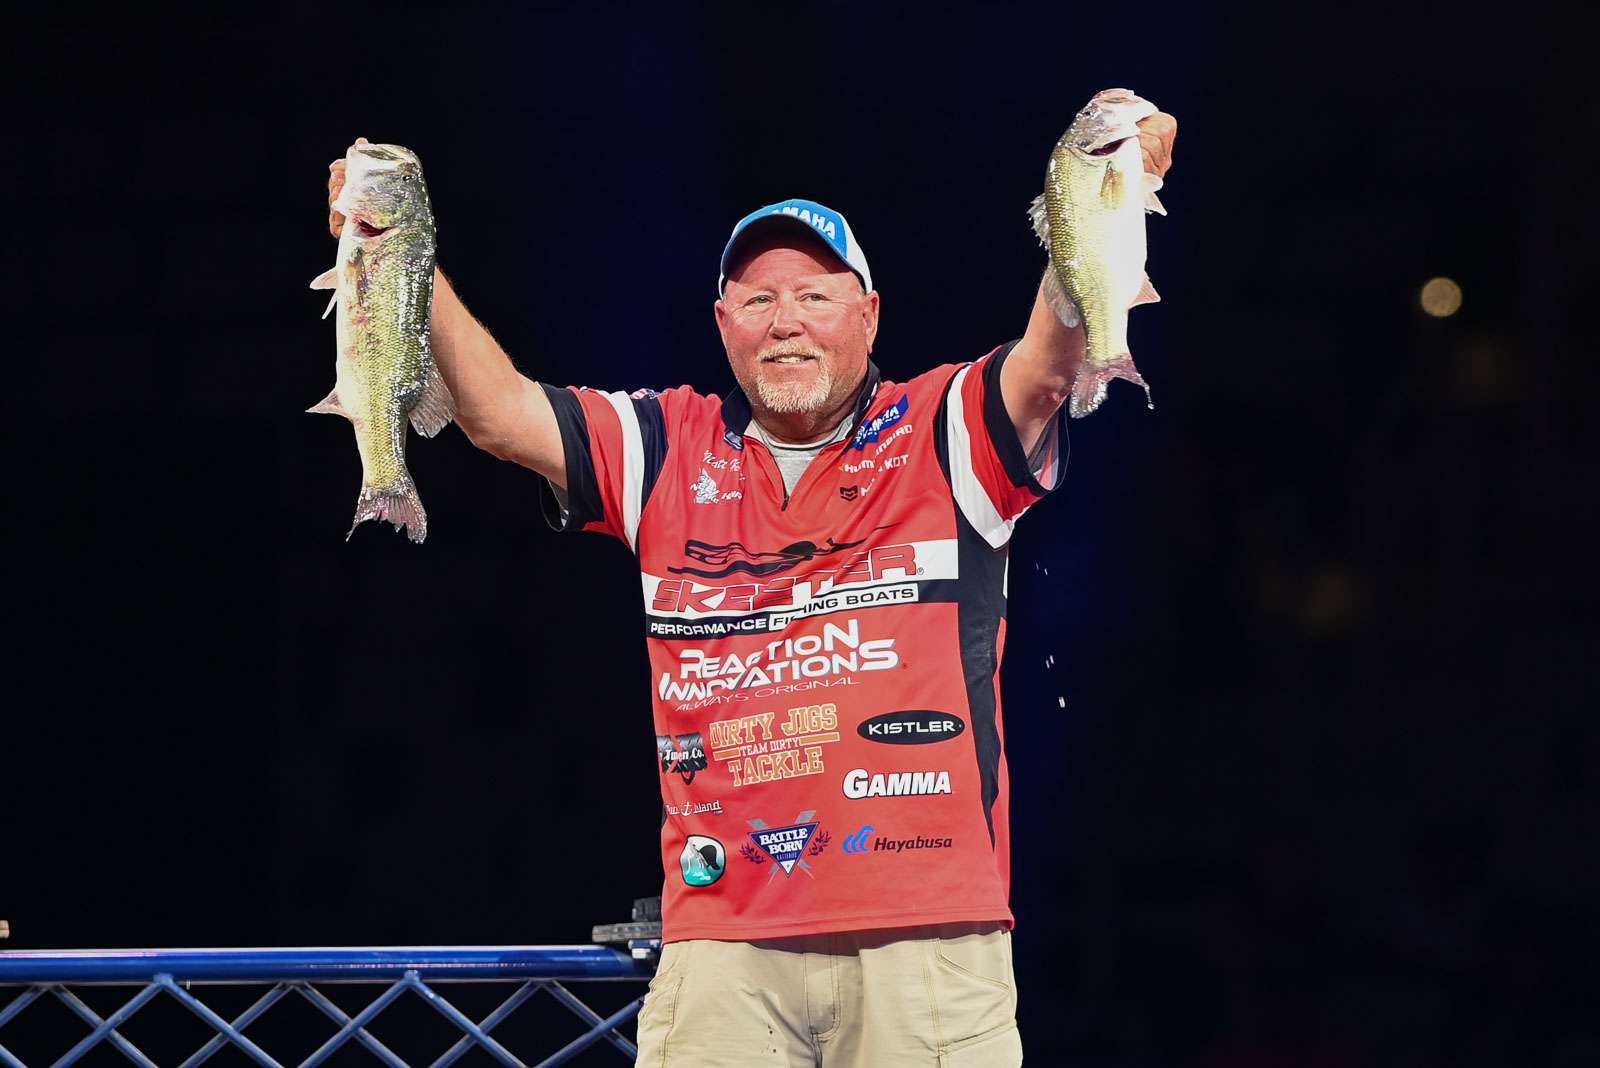 

<h4>Matt Herren (15-1)</h4>
<p><b>Ashville, Alabama</b><br />
Another of the old hands in terms of Classic experience, Herren is making his 10th career appearance in pro fishing’s biggest event. He’s a jig-fishing whiz who also brings Hartwell experience to the table. He fished the frigid 2015 Classic on Hartwell and says if he hadn’t zigged when he should have zagged, he would have placed much higher than his eventual landing spot of 31st place. He also finished 19th at 2019 Elite on Hartwell.<br />
” class=”wp-image-567946″ width=”1600″ height=”1068″/><figcaption>
<h4>Matt Herren (15-1)</h4>
<p><b>Ashville, Alabama</b><br />
Another of the old hands in terms of Classic experience, Herren is making his 10th career appearance in pro fishing’s biggest event. He’s a jig-fishing whiz who also brings Hartwell experience to the table. He fished the frigid 2015 Classic on Hartwell and says if he hadn’t zigged when he should have zagged, he would have placed much higher than his eventual landing spot of 31st place. He also finished 19th at 2019 Elite on Hartwell.<br />
</figcaption></figure>
<div class=